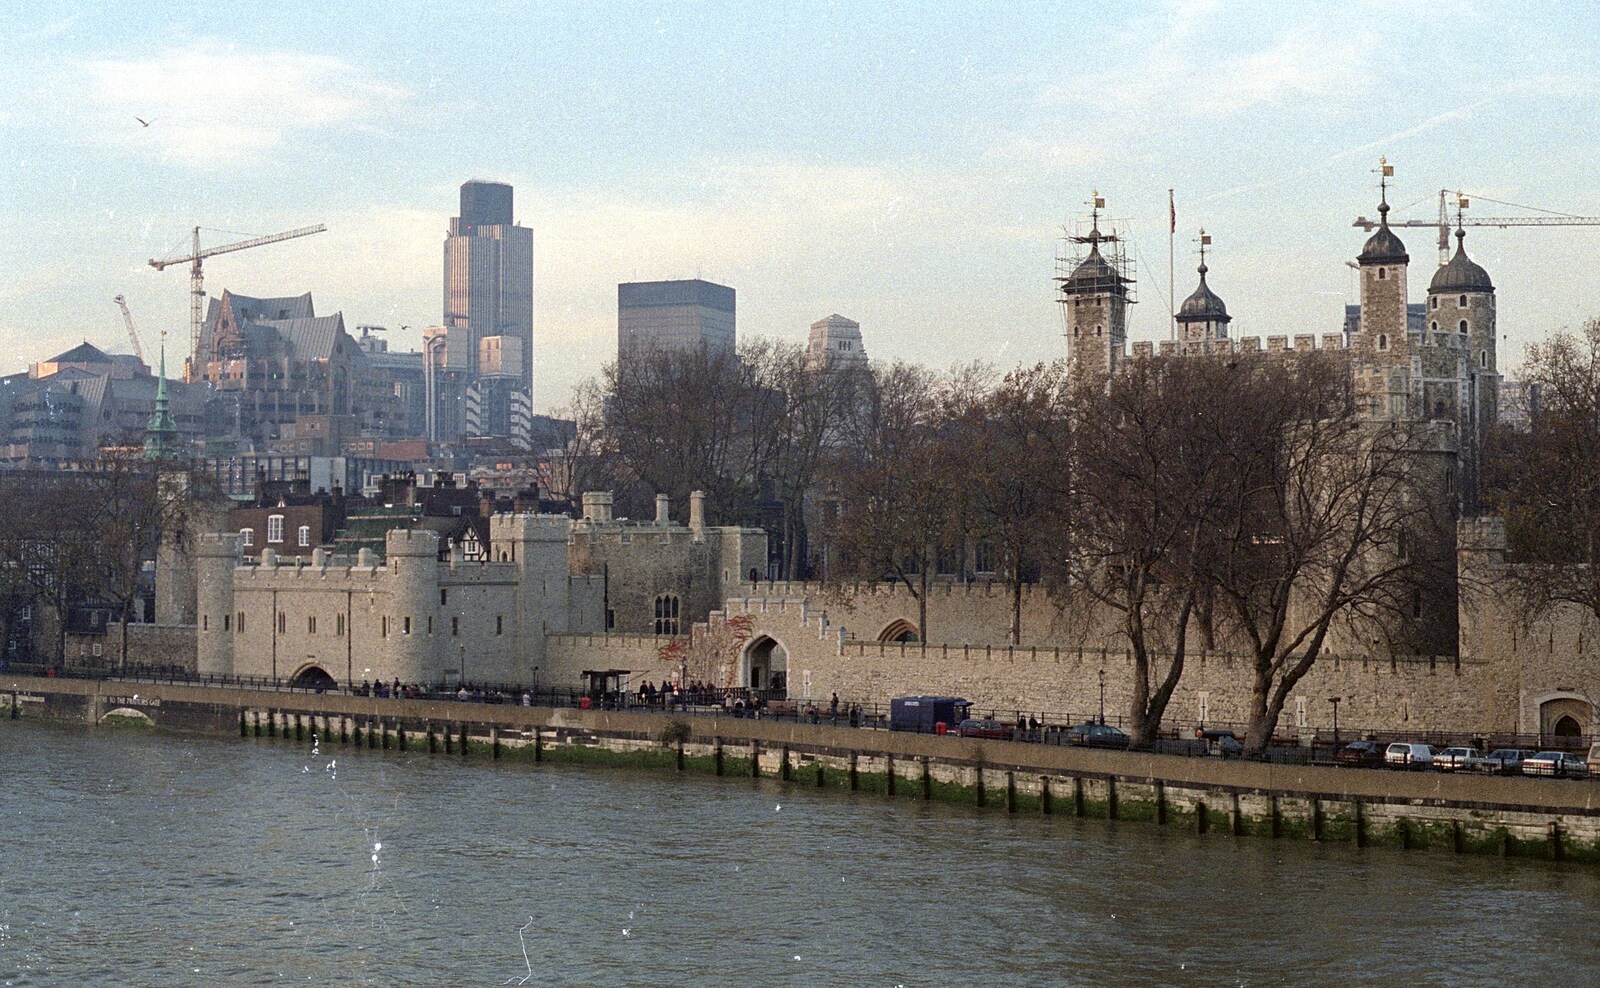 The Tower of London from Pre-Christmas Dinner and a Next-Door Do, Stuston, Suffolk - 20th December 1990